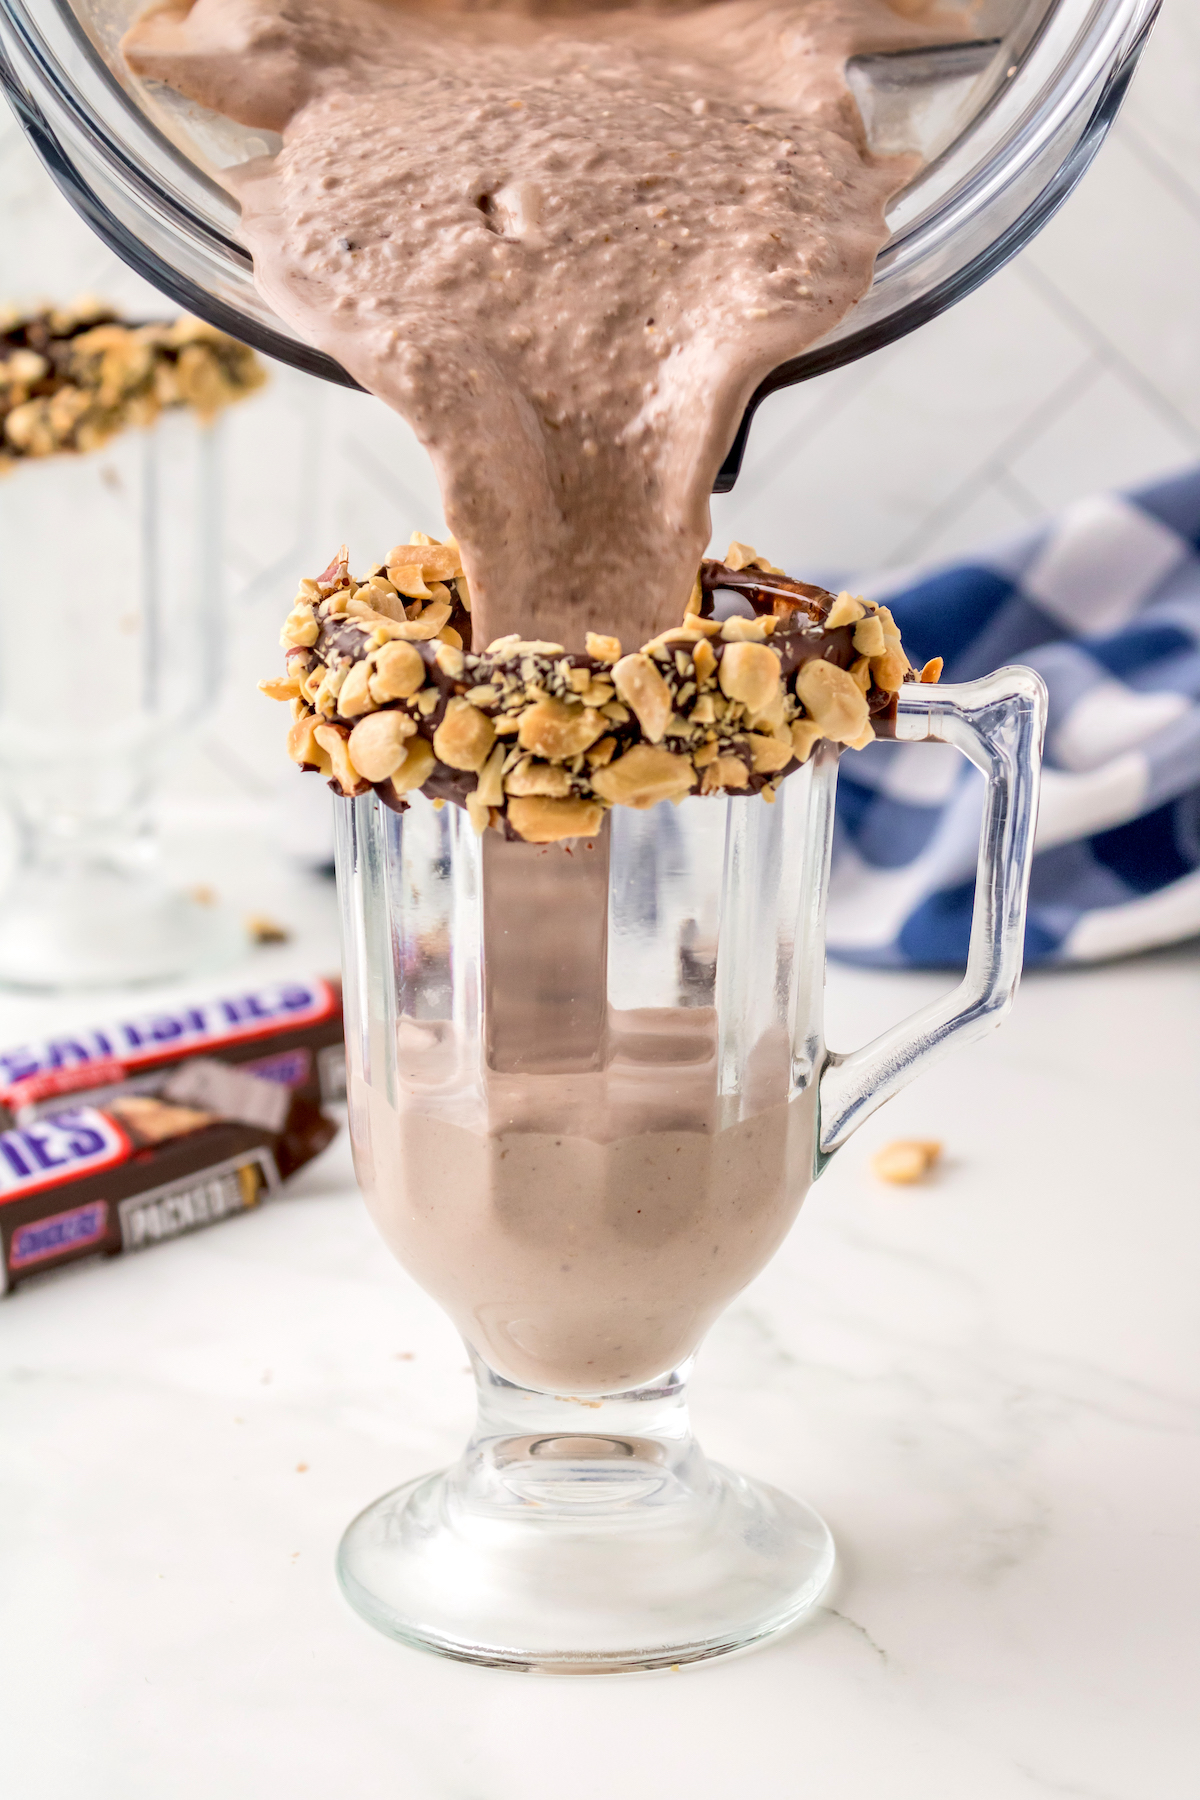 Pouring the Snickers milkshake into the glass